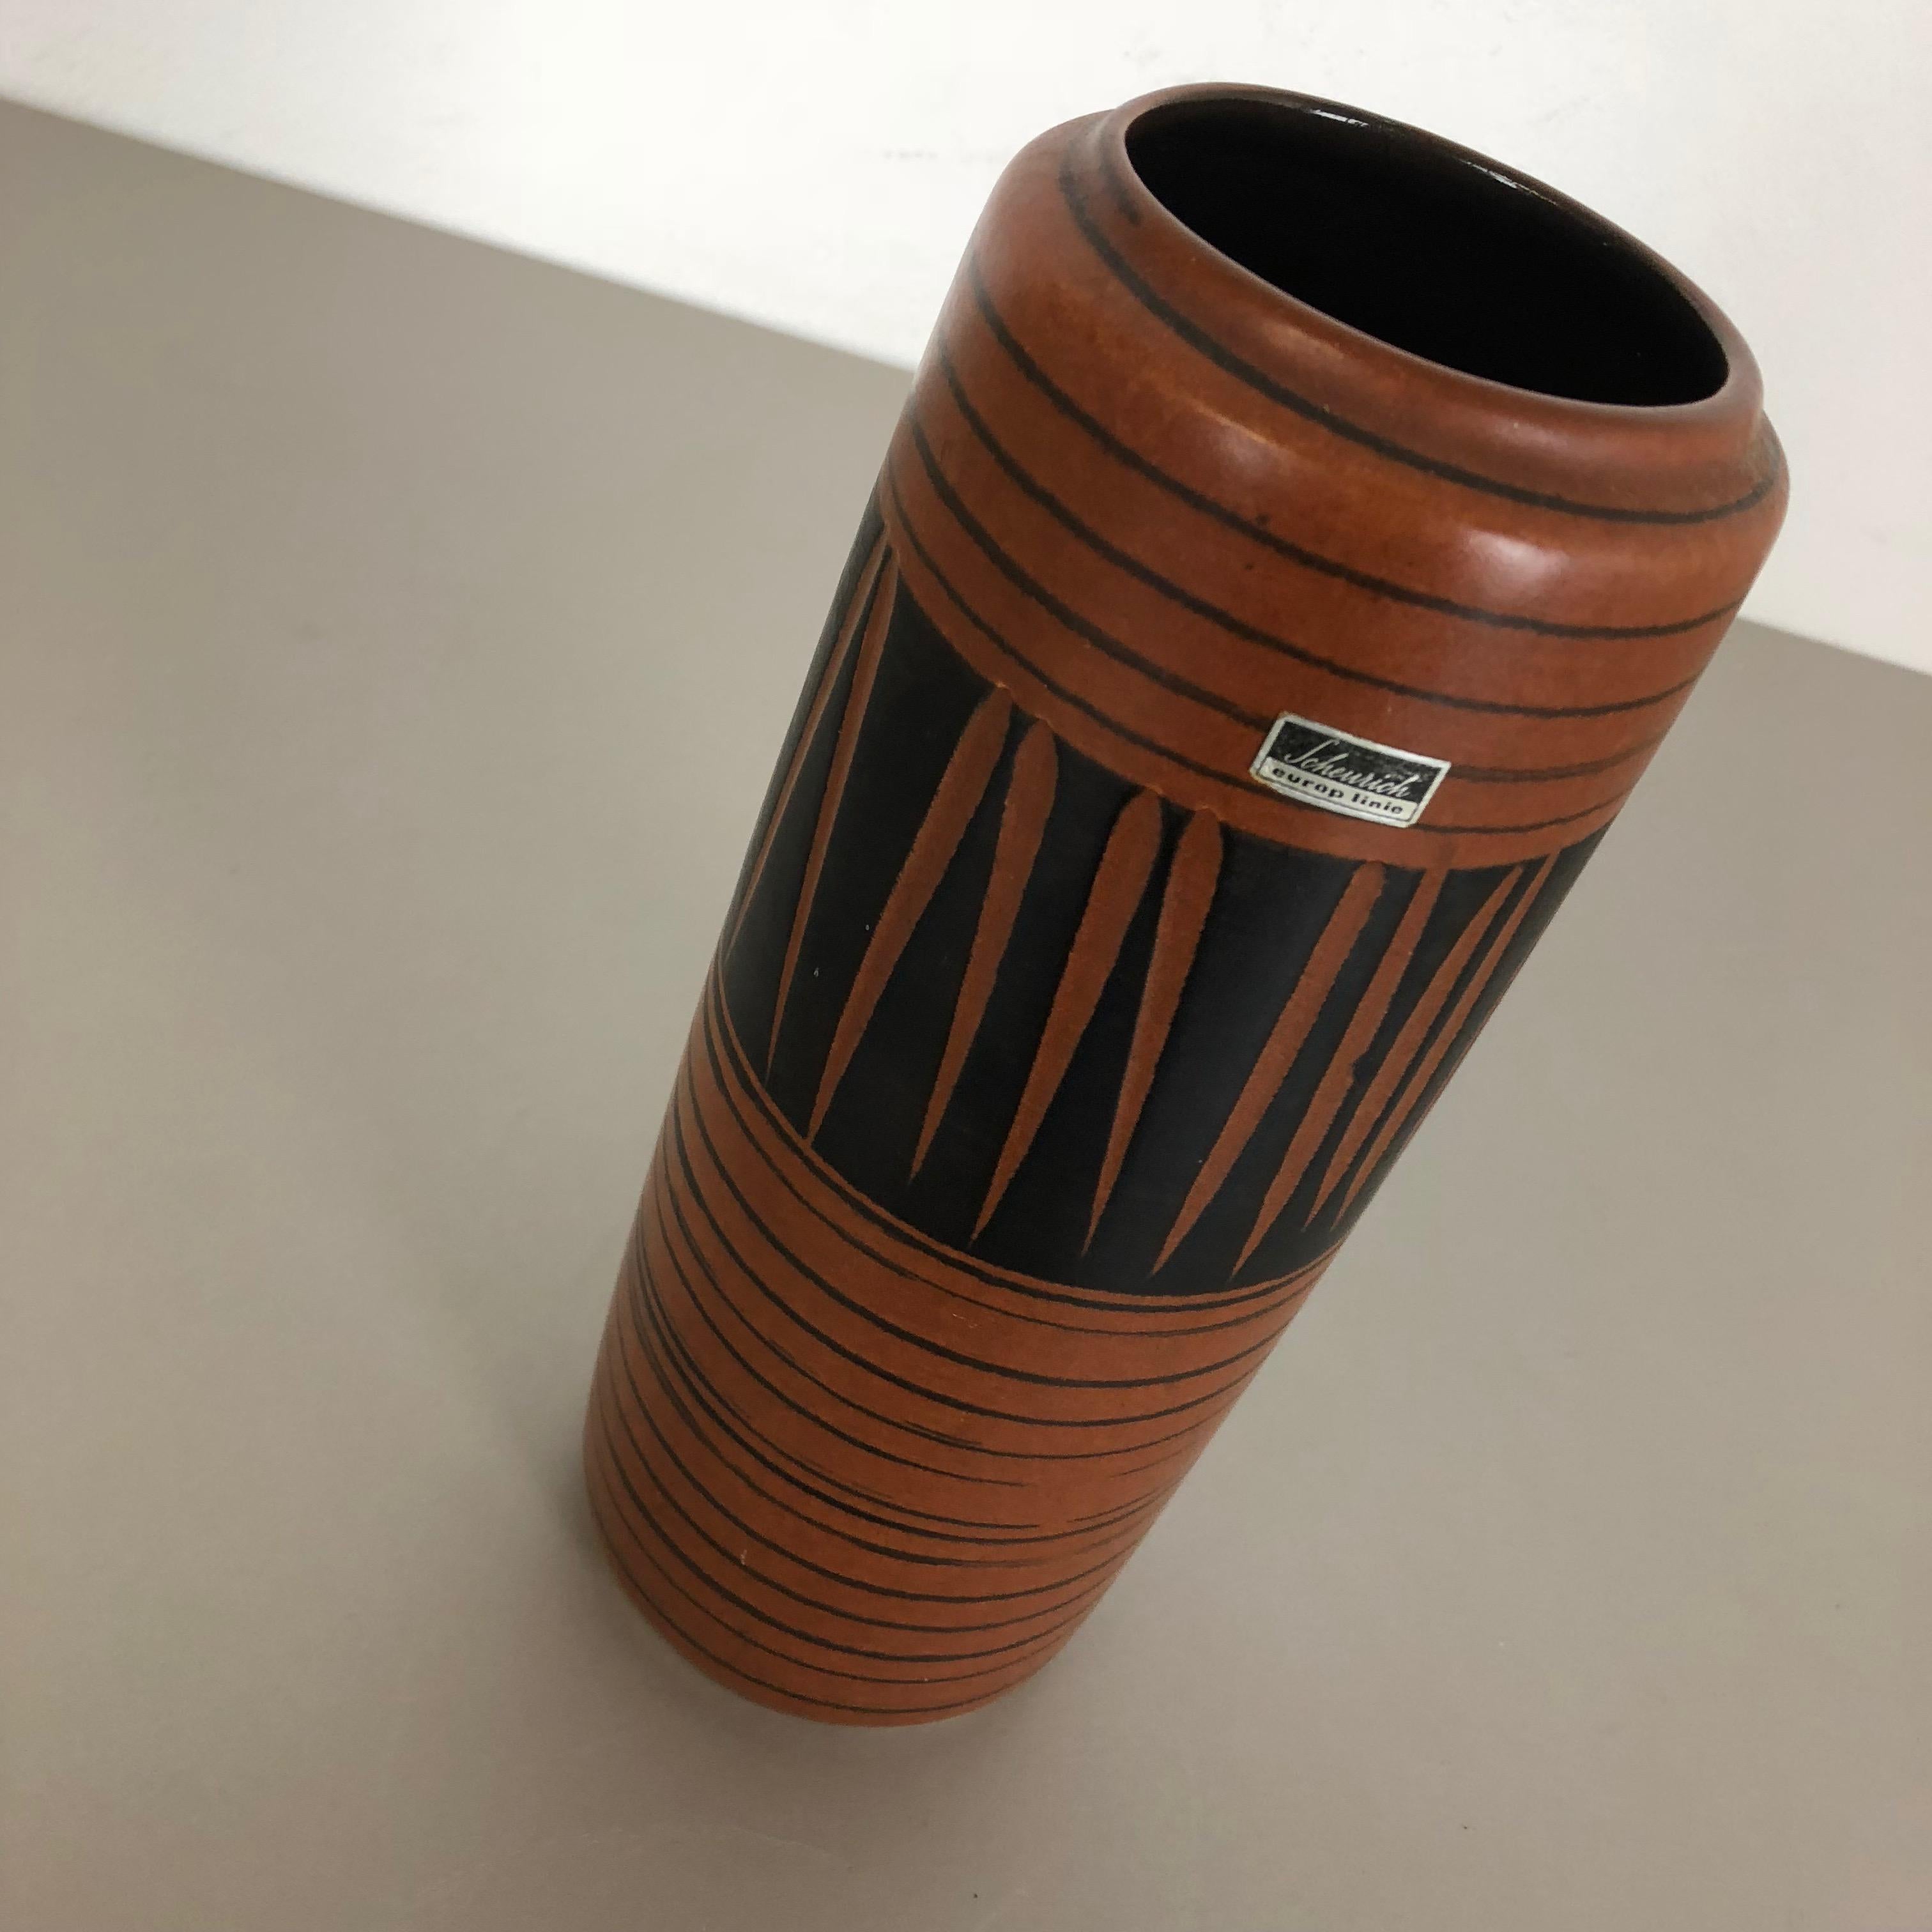 Extraordinary Vintage Pottery Fat Lava Vase Made by Scheurich, Germany, 1970s For Sale 1